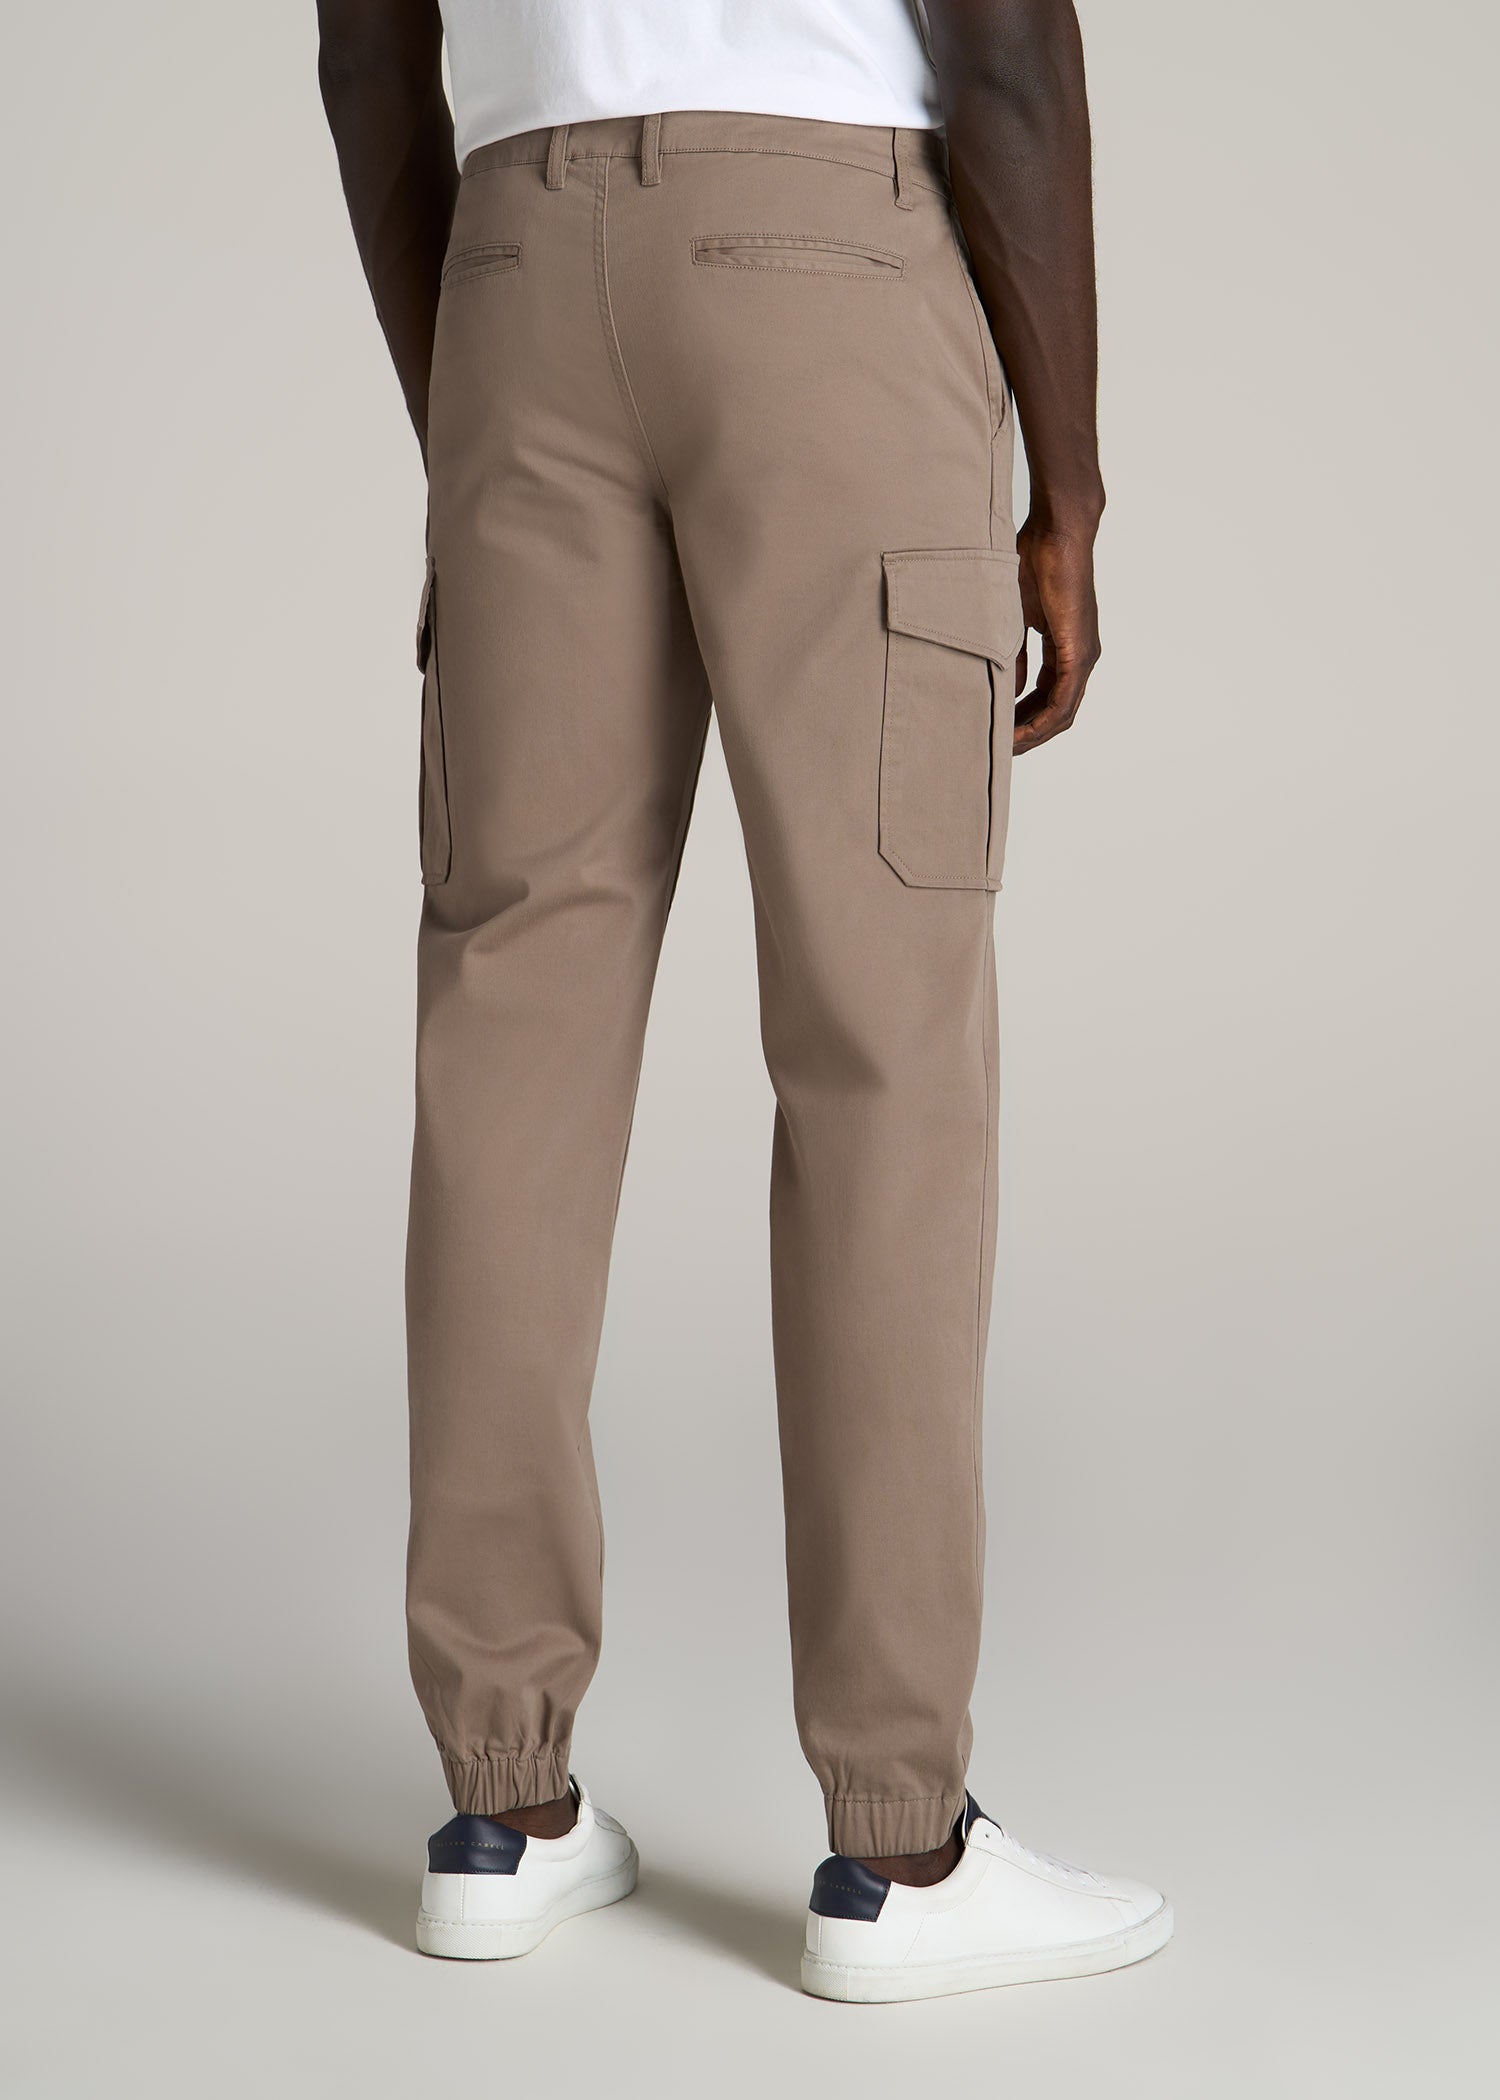 Buy Light Gray Side Pocket Straight Cargo Pants Cotton for Best Price,  Reviews, Free Shipping